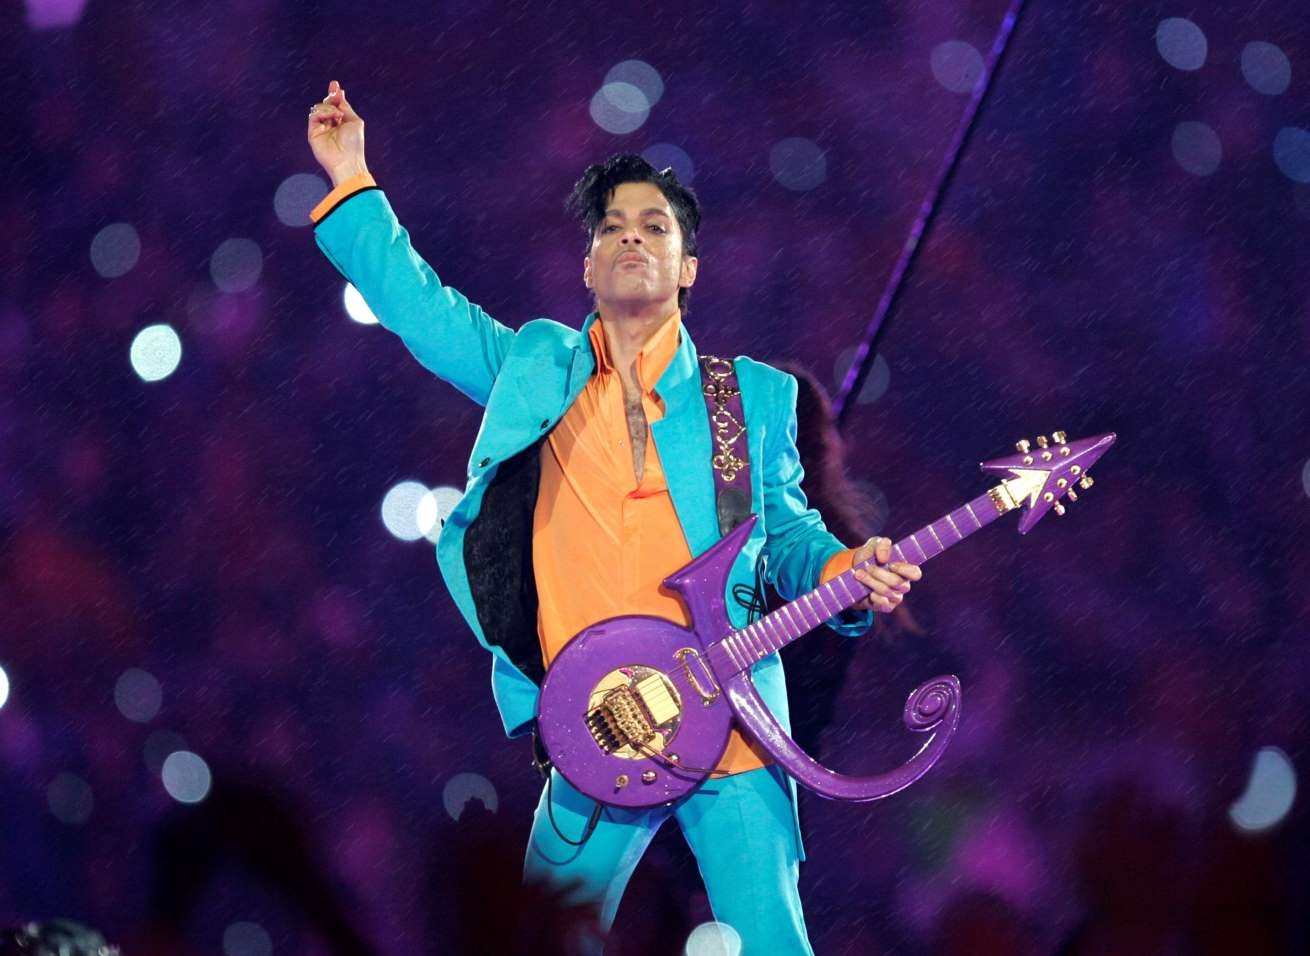 Official says Prince died of opioid overdose